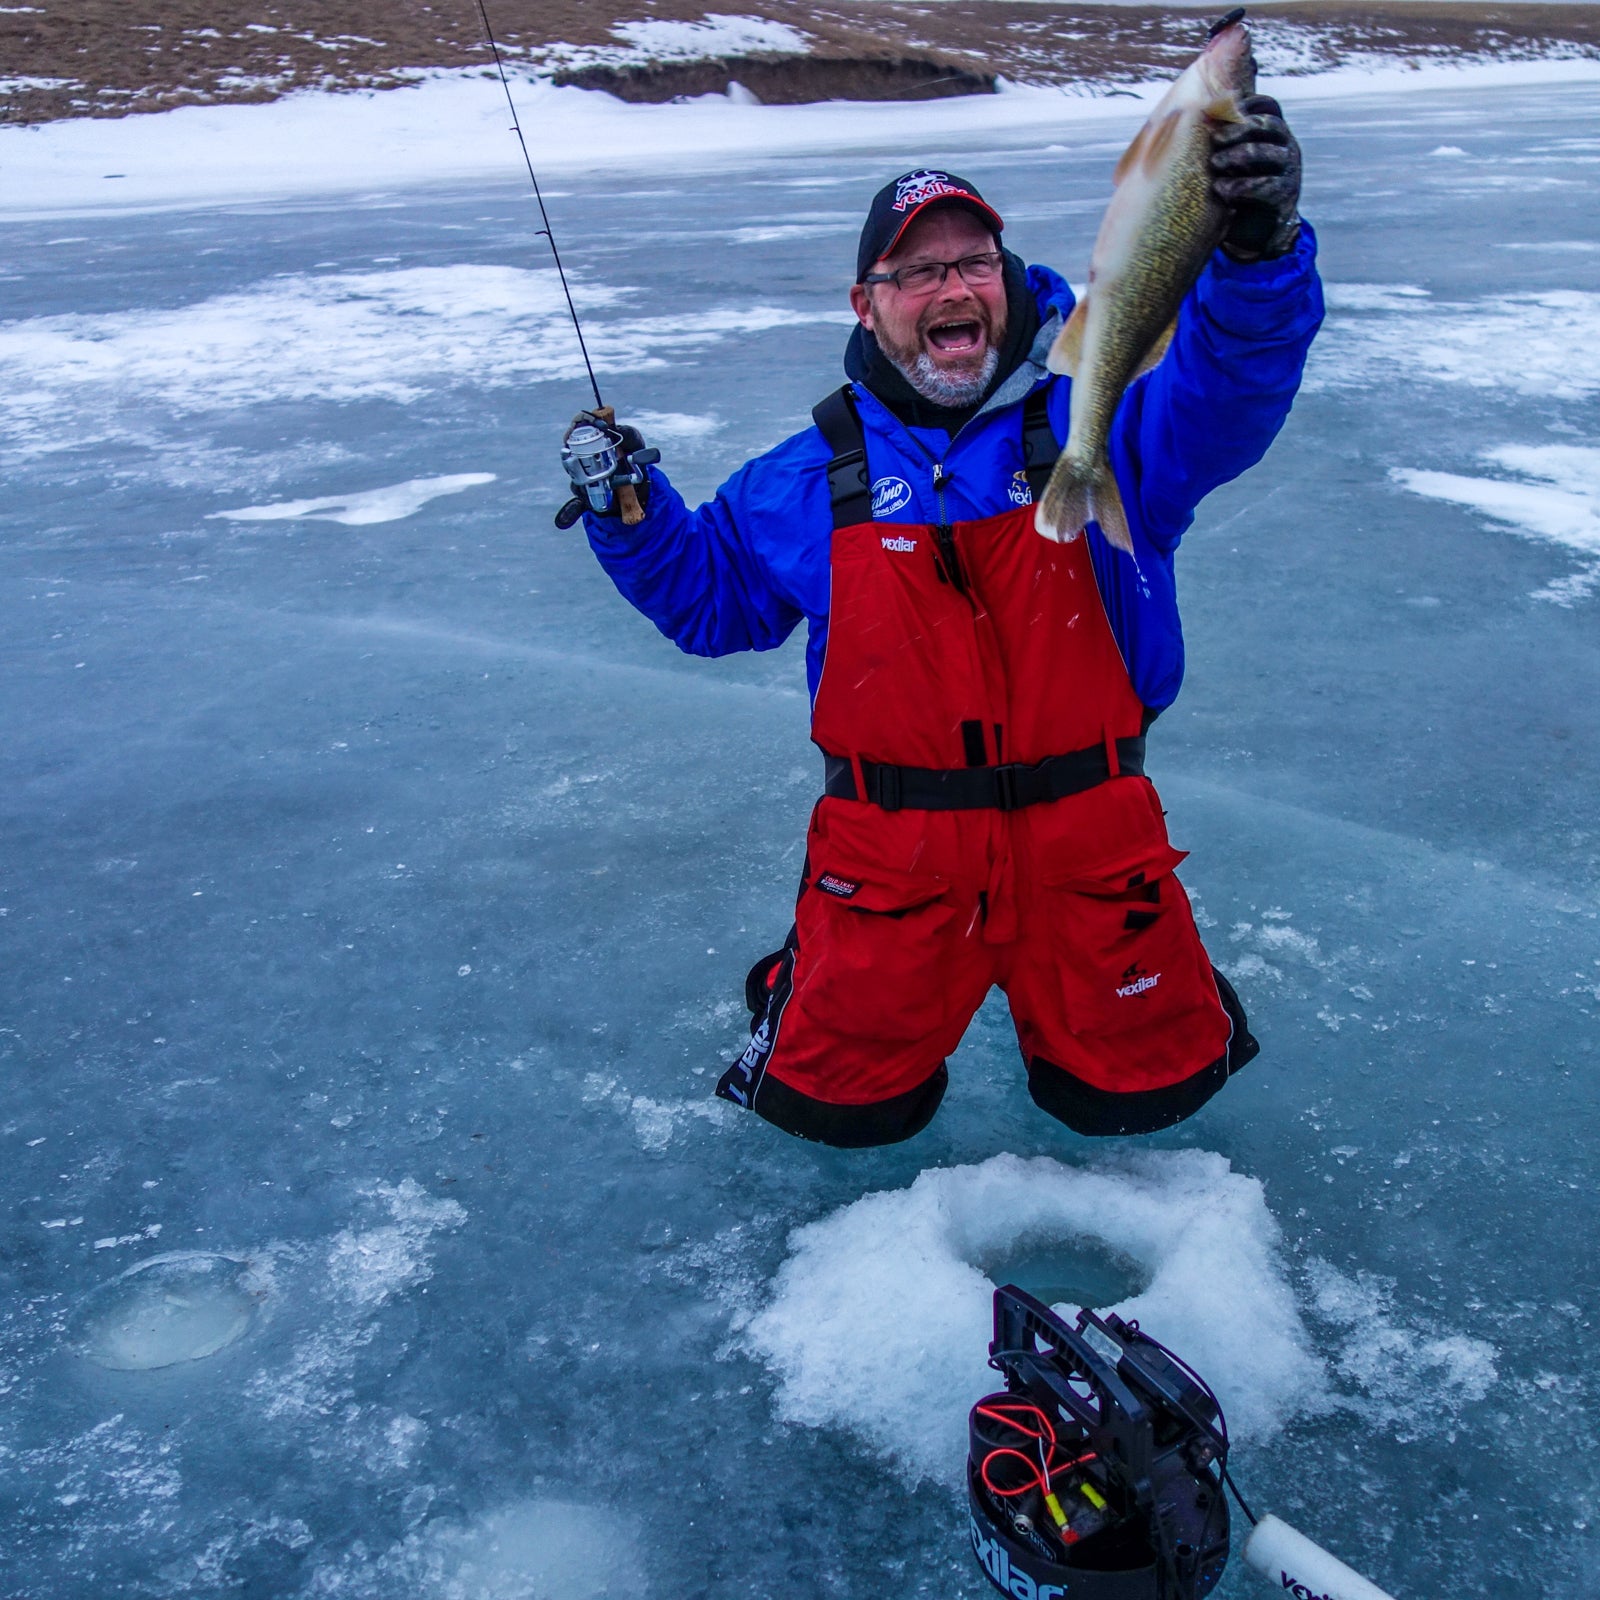 Ice Fishing for Kids (Into the Great Outdoors)